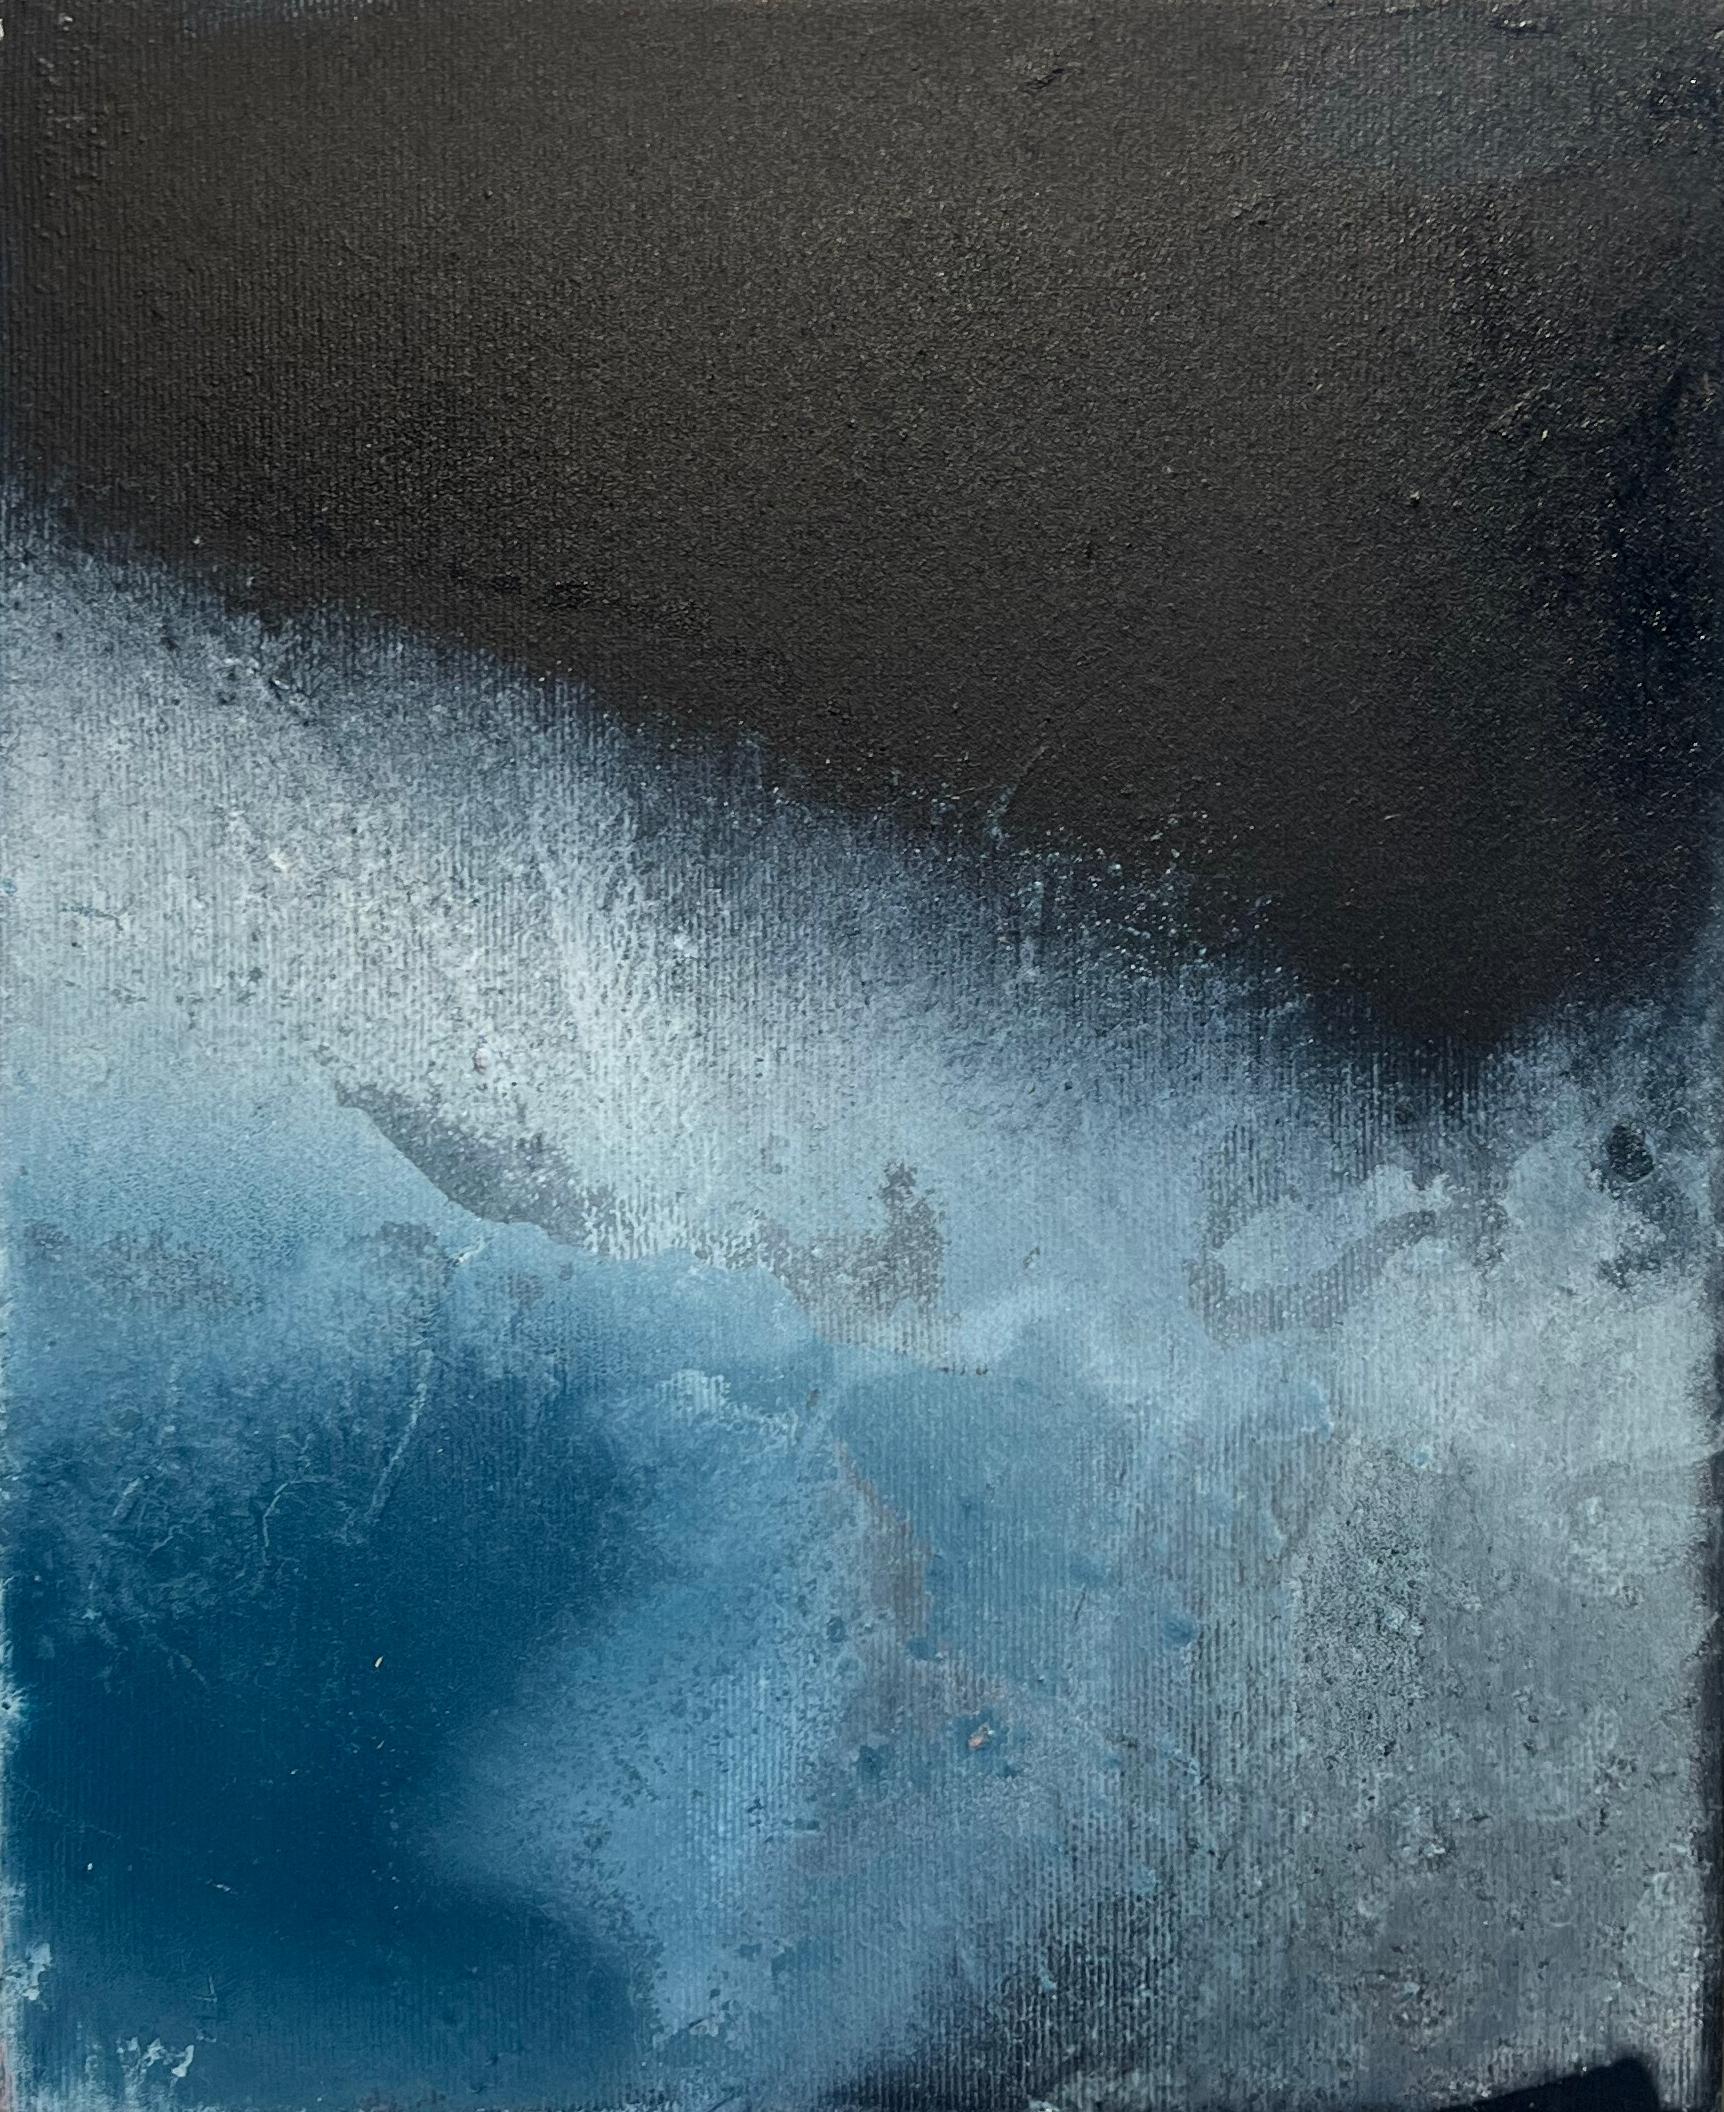 Landscape, oil on canvas with aluminum frame, sea blue, waves texture